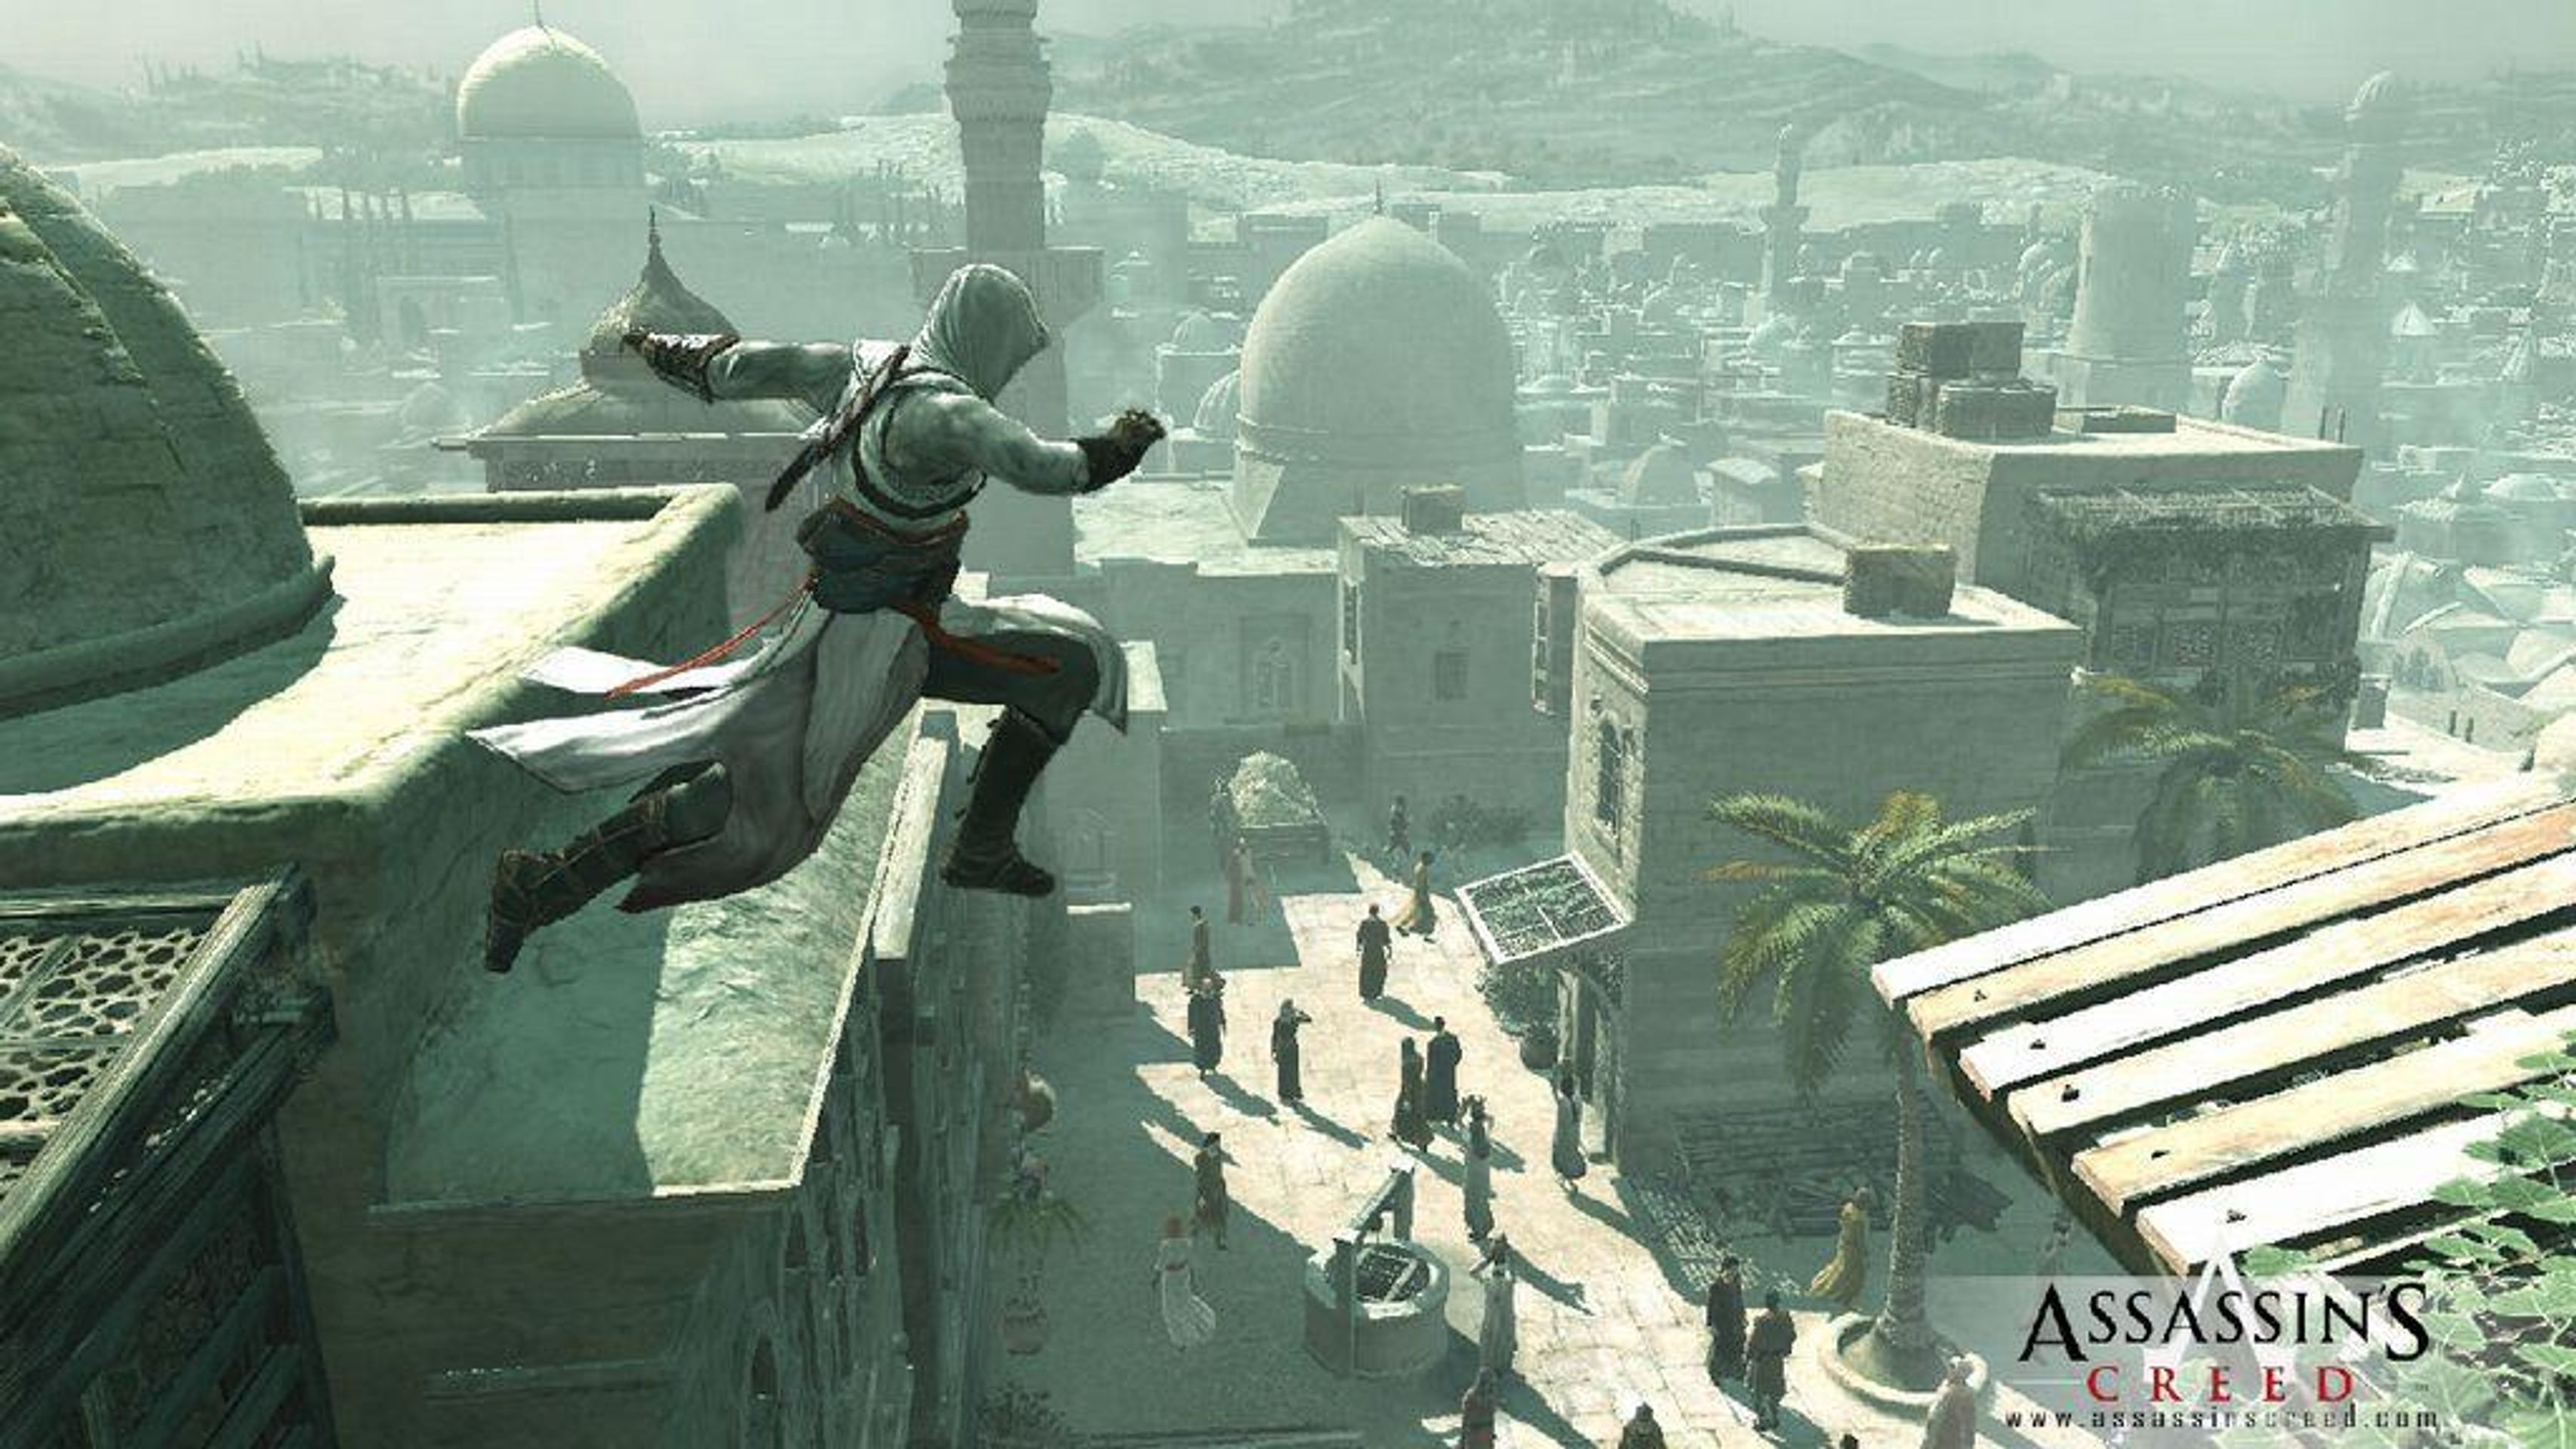 Assassins's Creed - Assassin's Creed galerie (2/5)